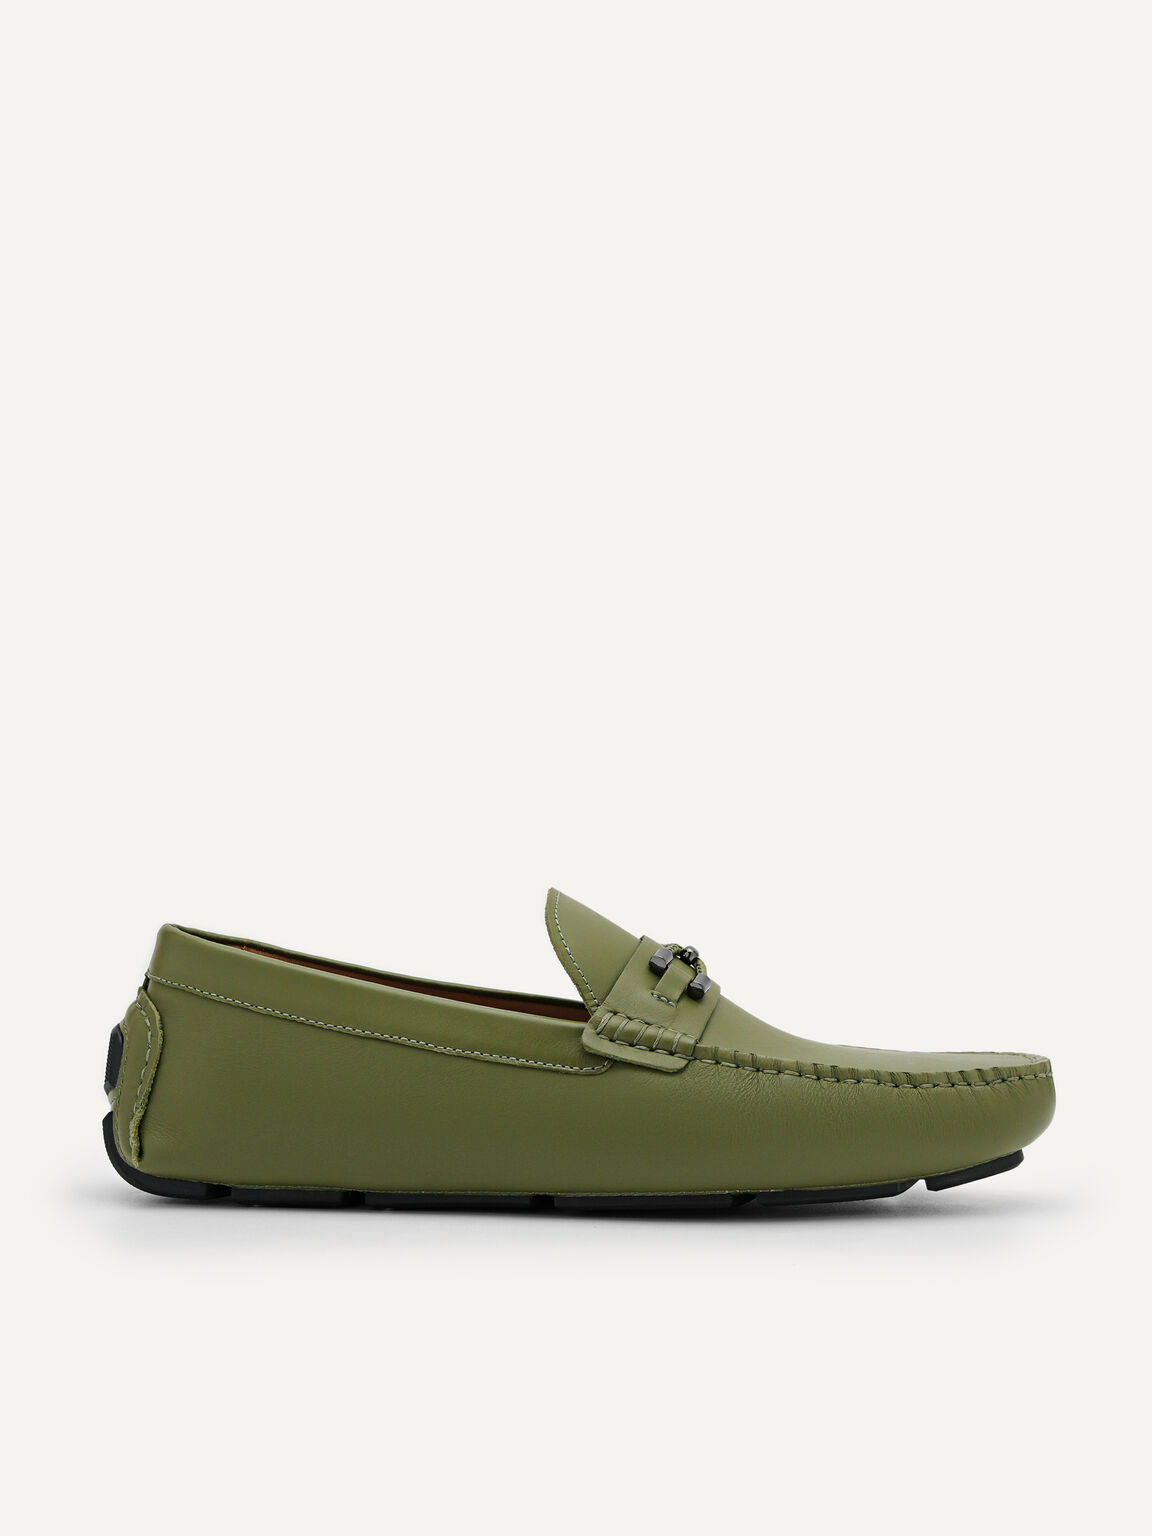 Leather Horsebit Moccasins, Military Green